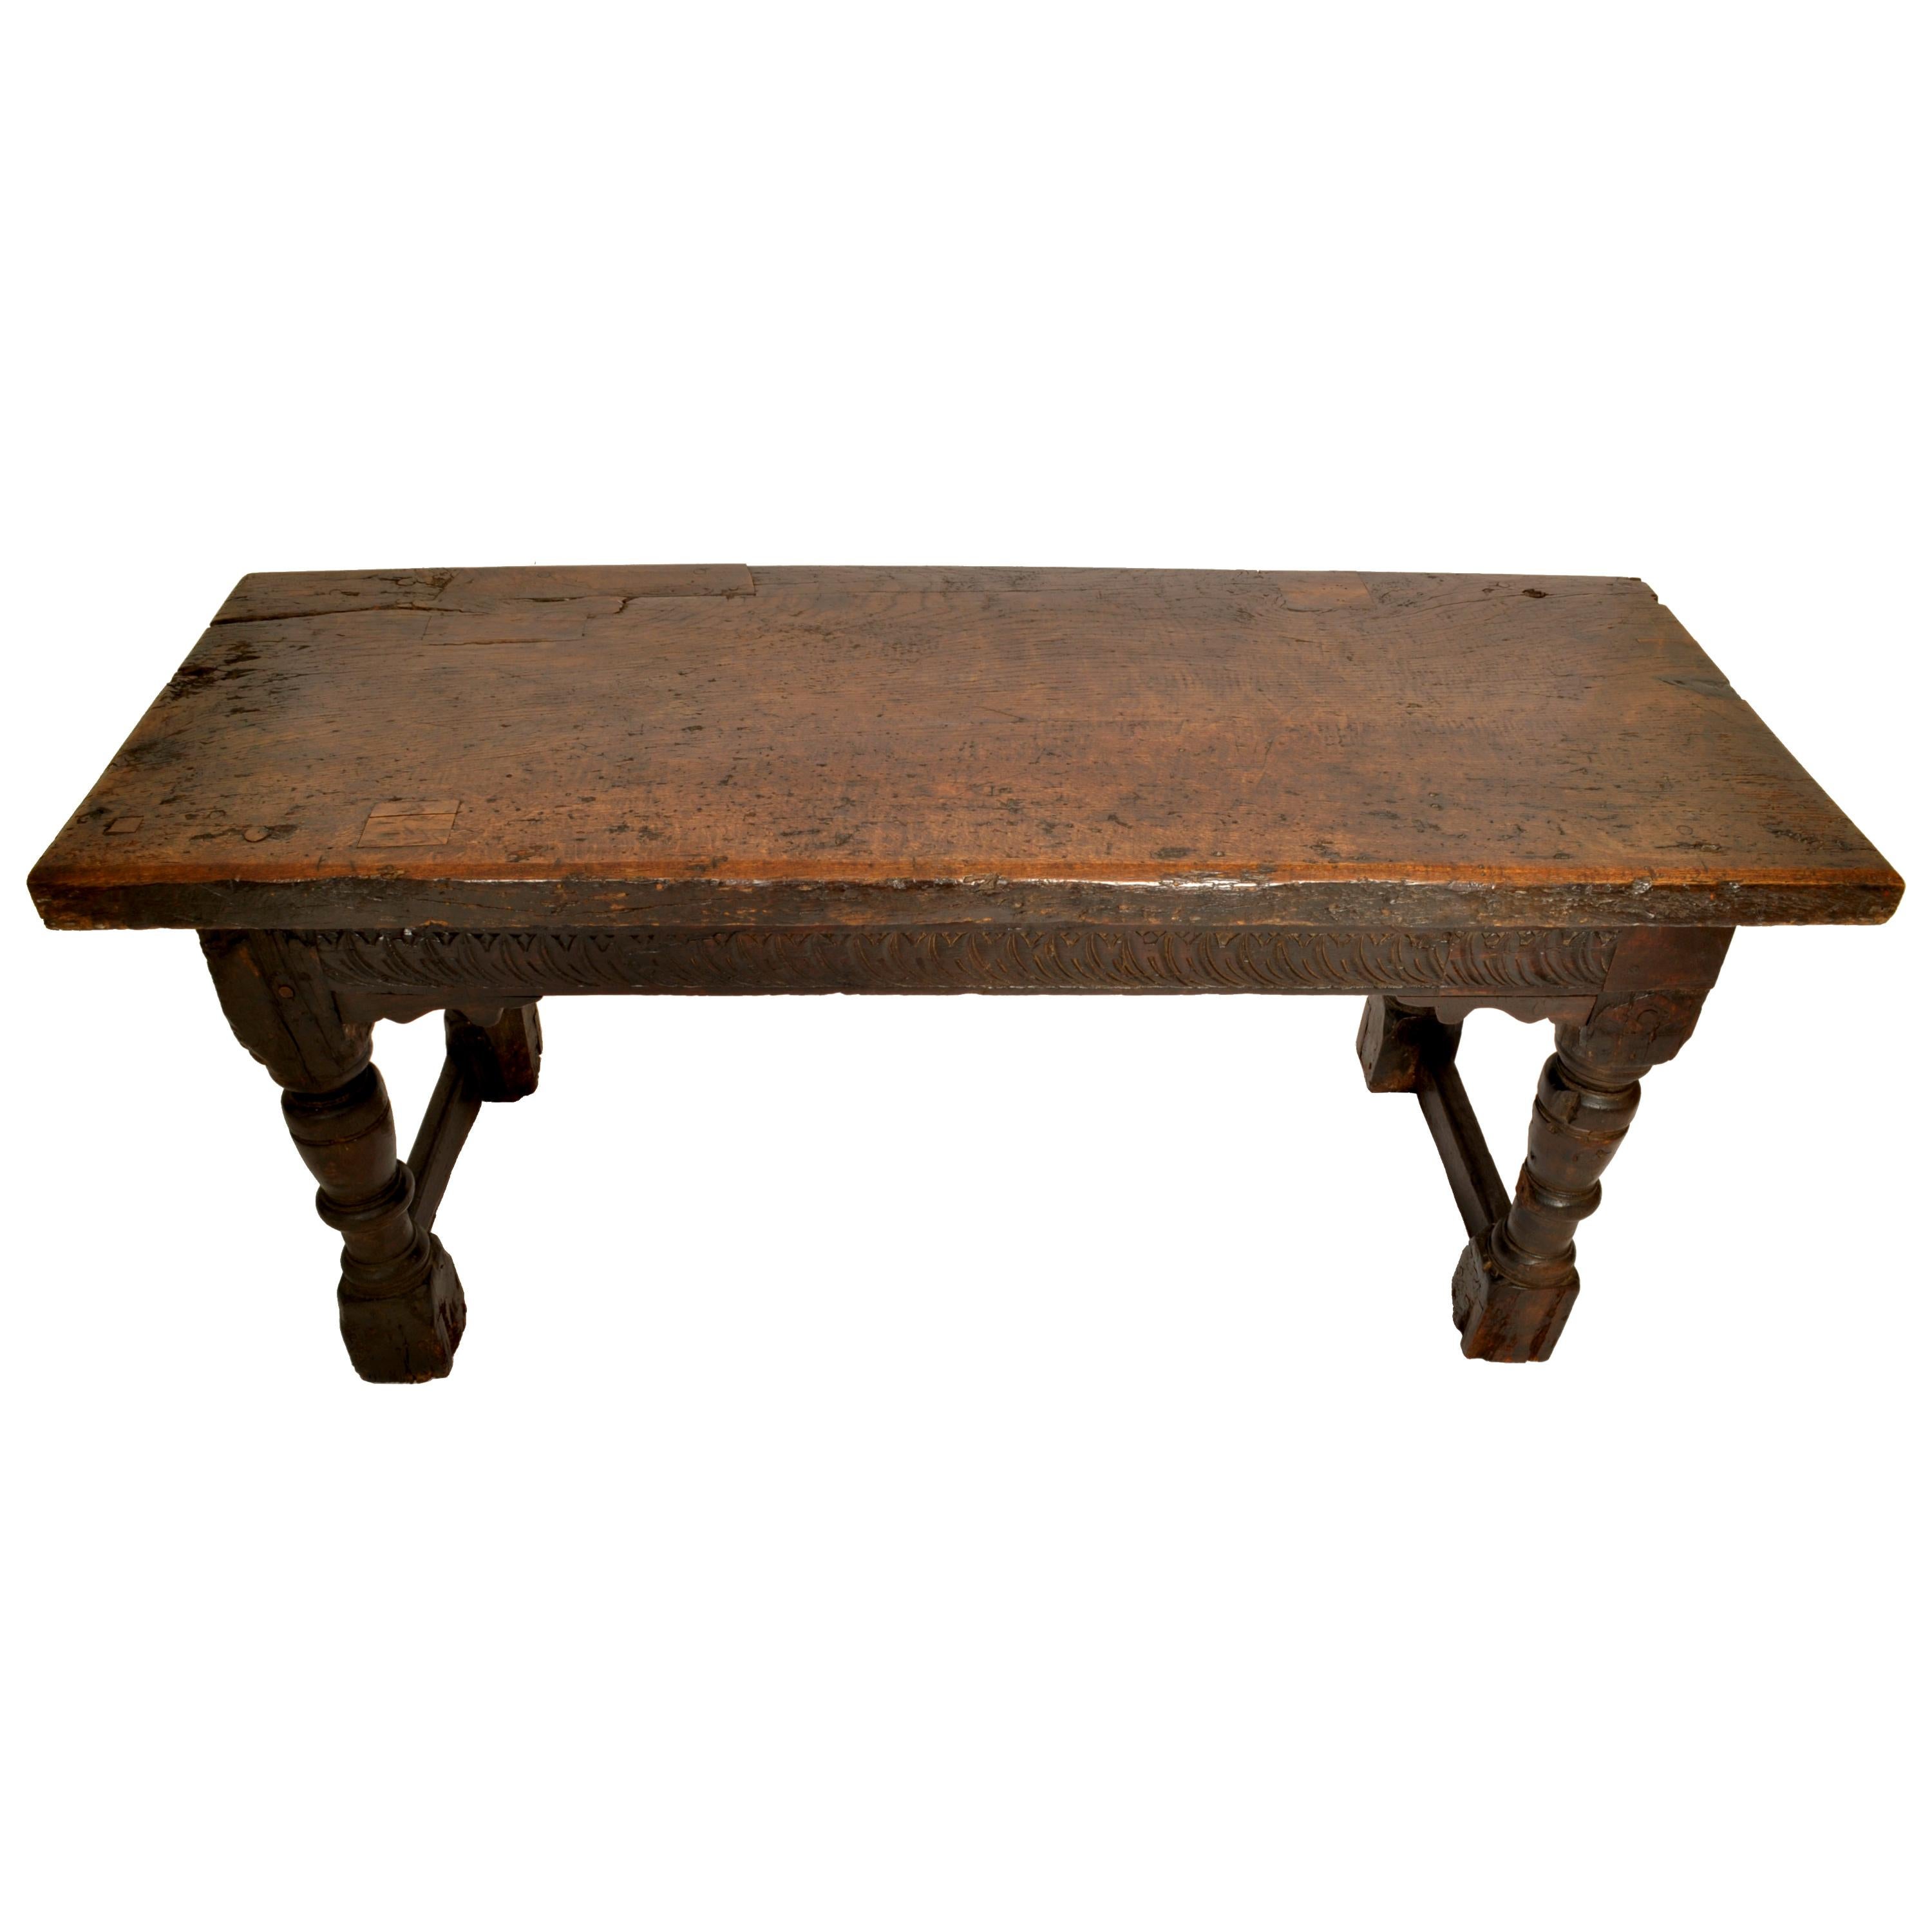 18th Century and Earlier Antique 16th Century Elizabethan Tudor Carved Oak Dining Refectory Table, 1550